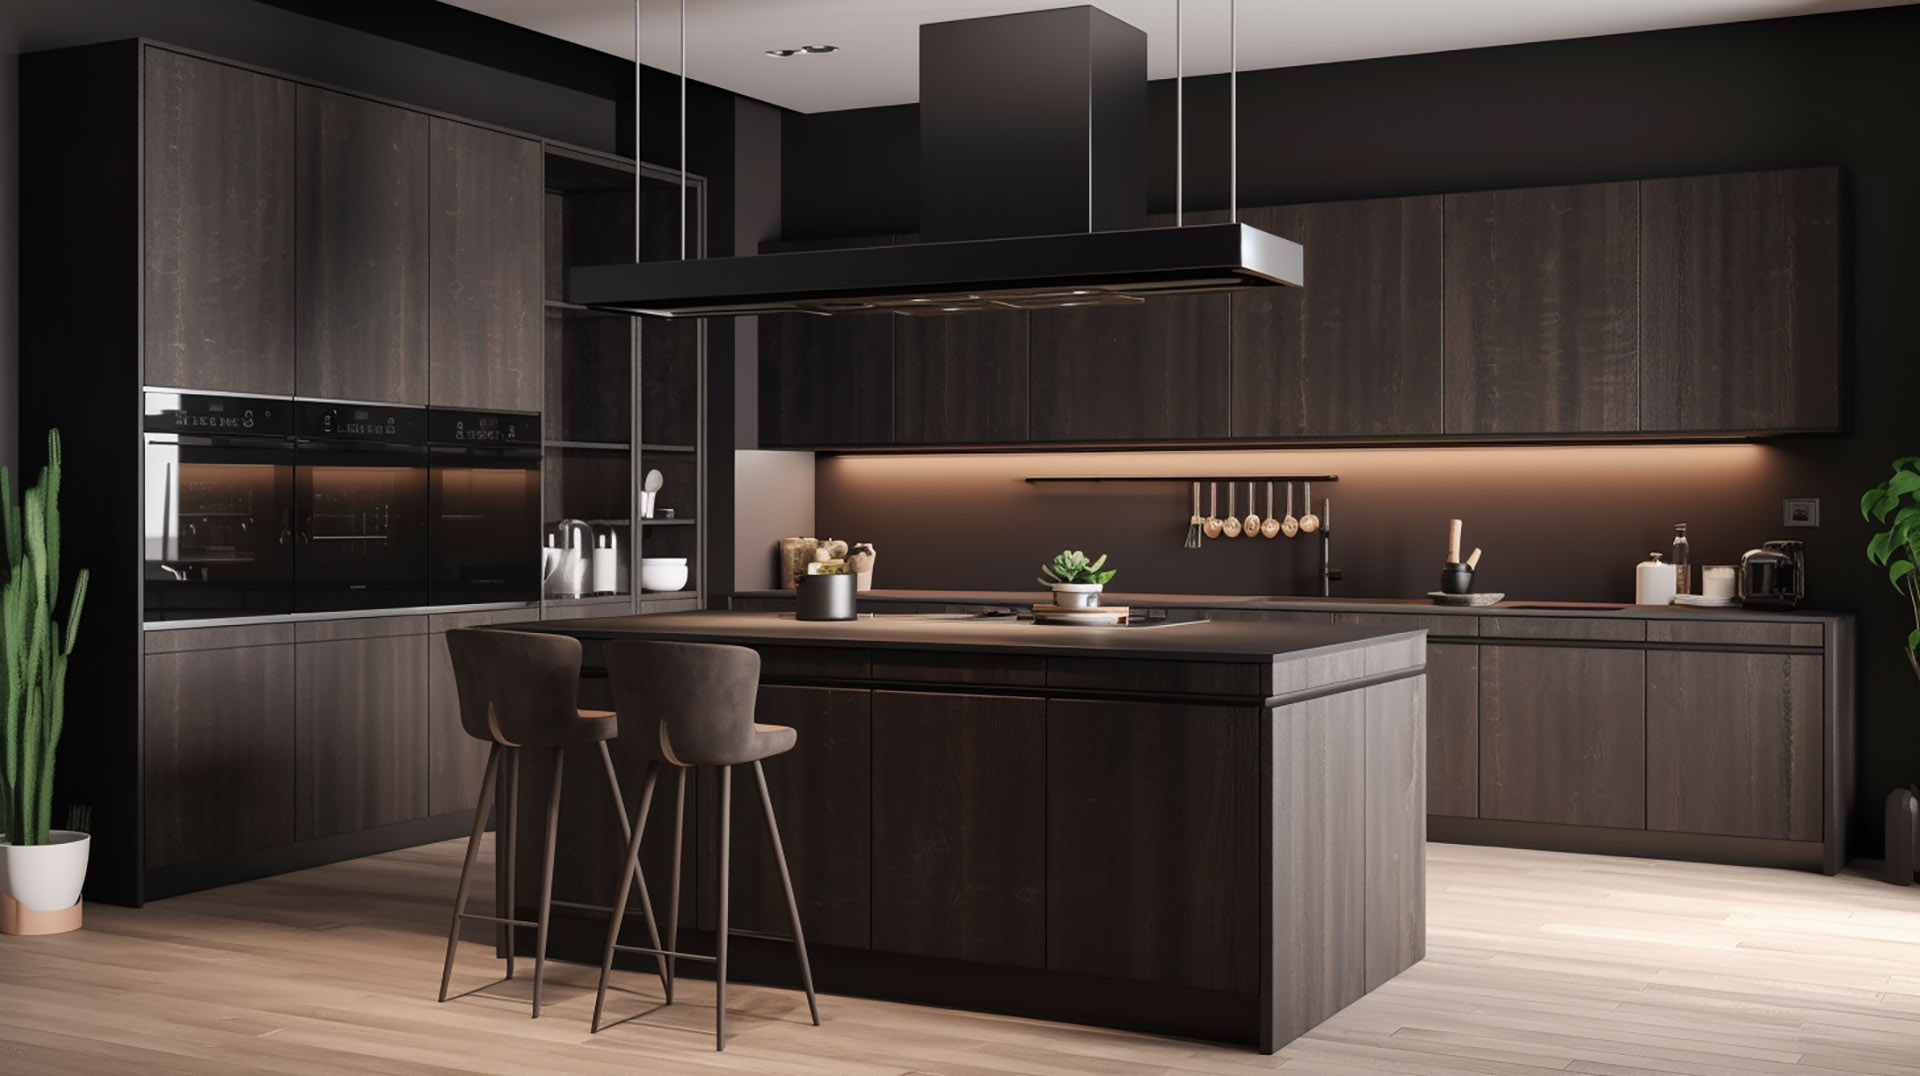 Kitchen Cabinet Manufacturers in China | Cheap Kitchen Cabinets From China